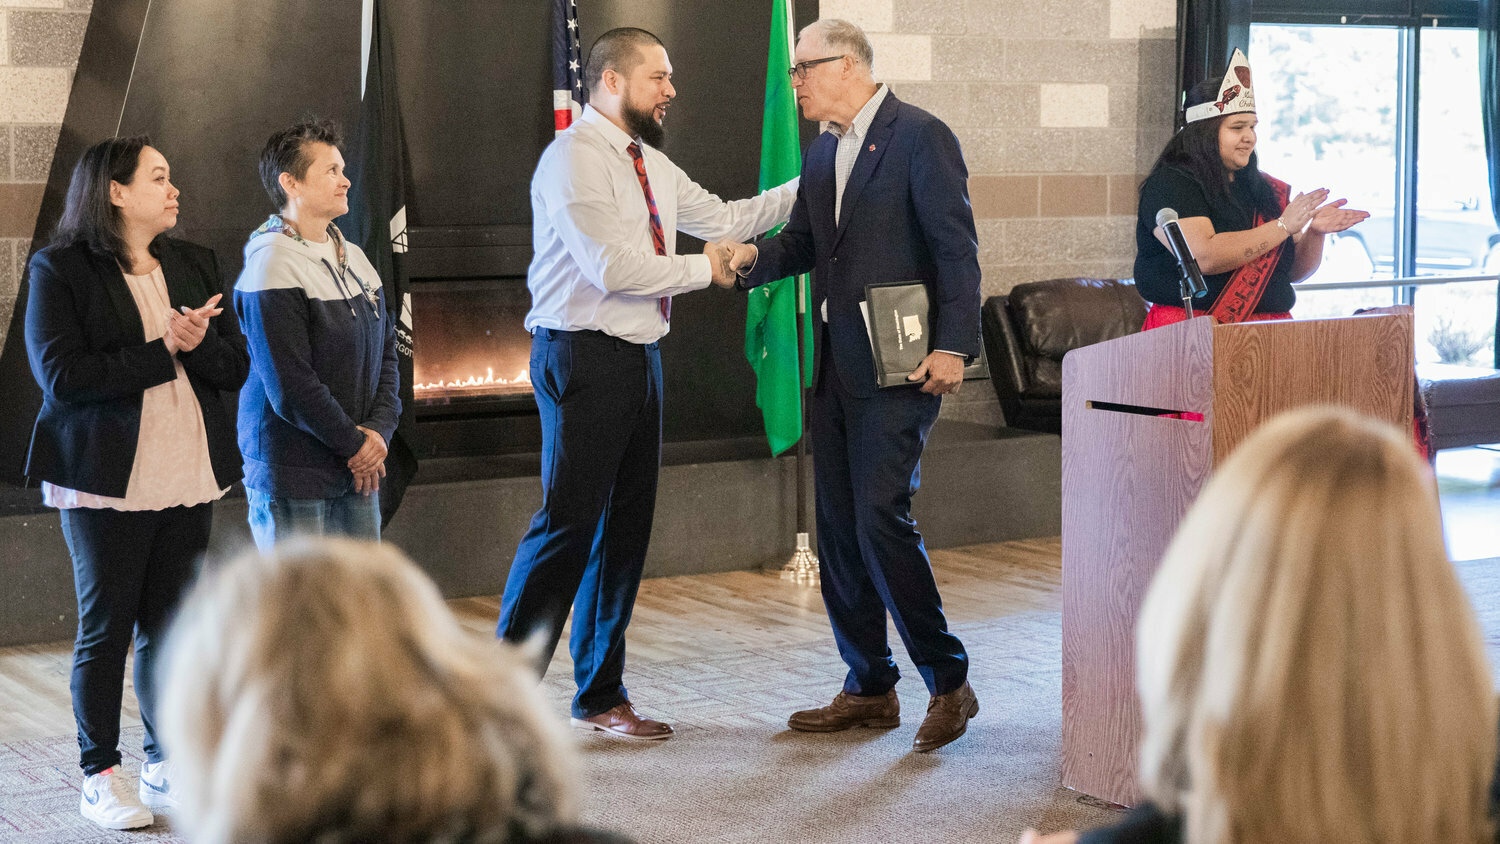 Chehalis Tribe Chairman Dustin Klatush shakes hands with Gov. Jay Inslee during a meeting discussing hydrogen power in Washington state near Oakville in April.